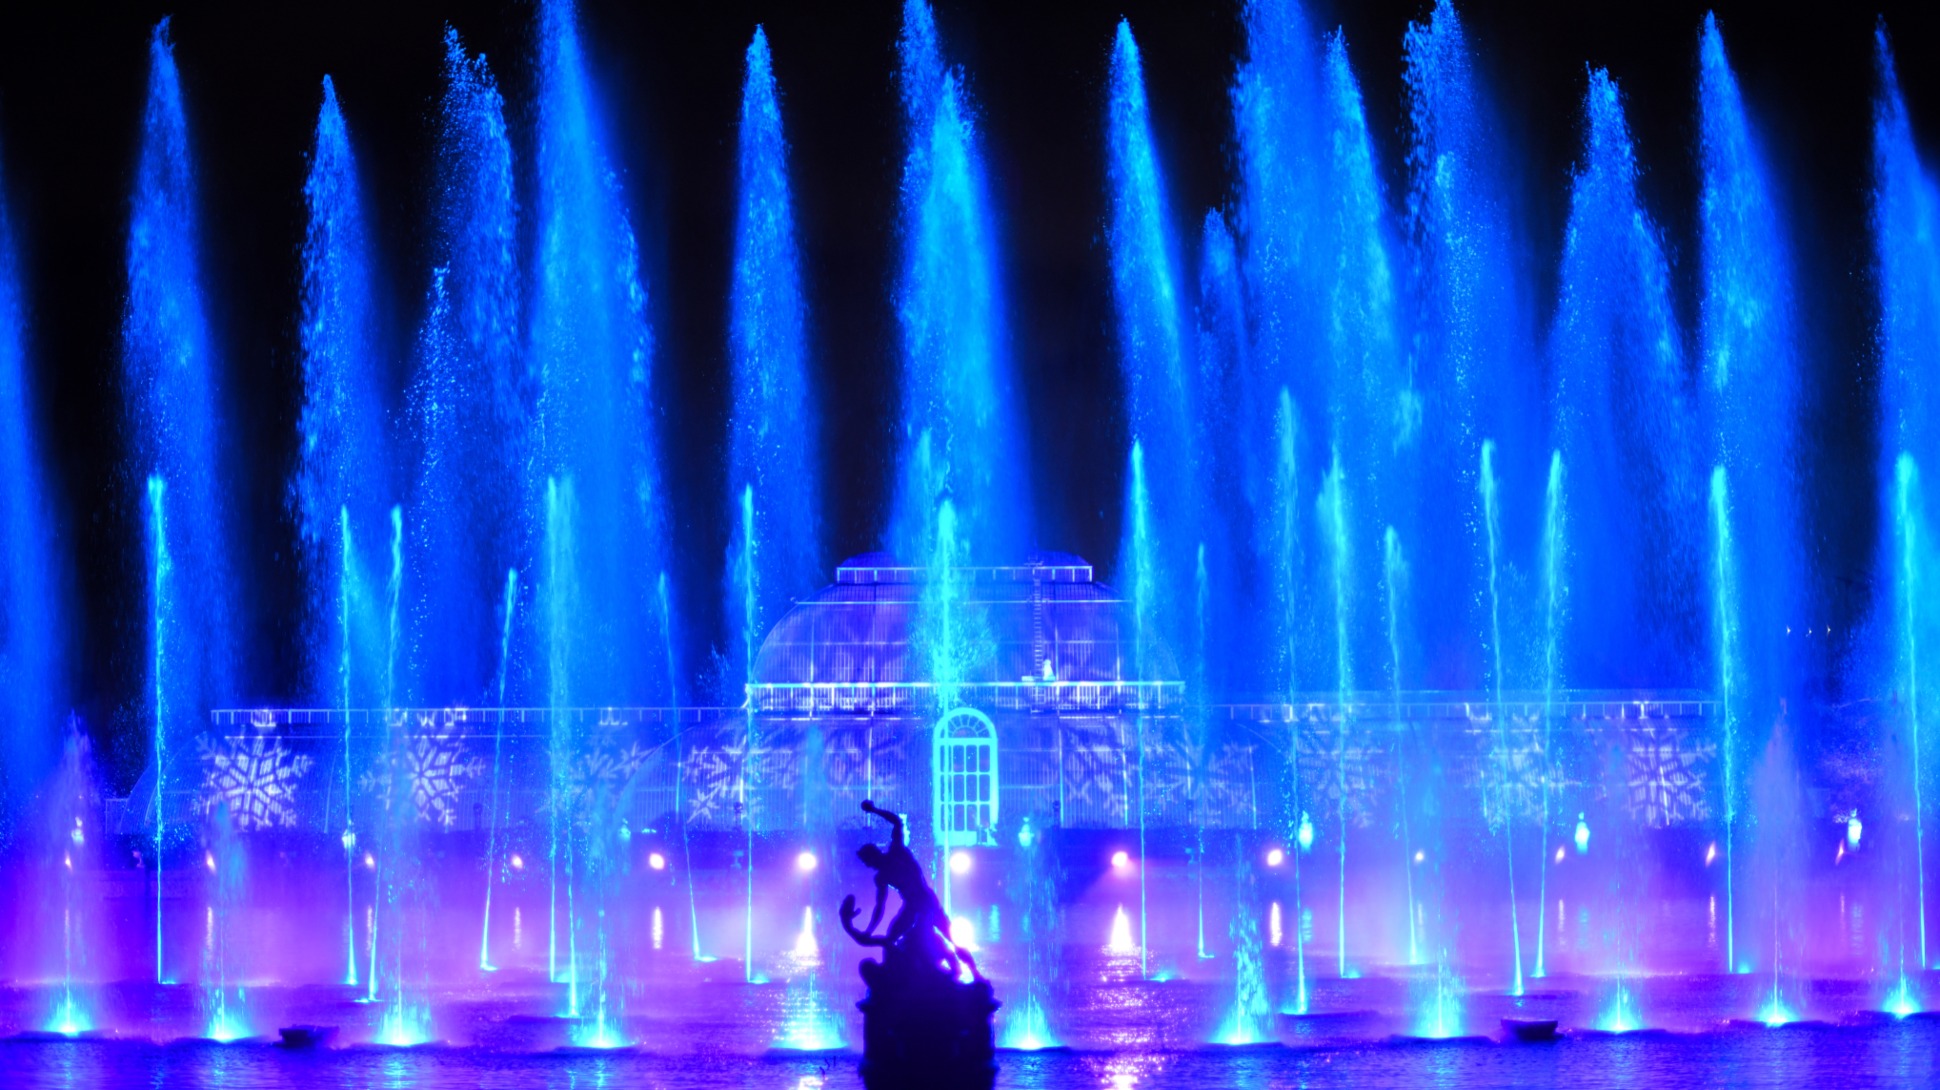 Palm House lit up blue and purple, vertical fountains in foreground